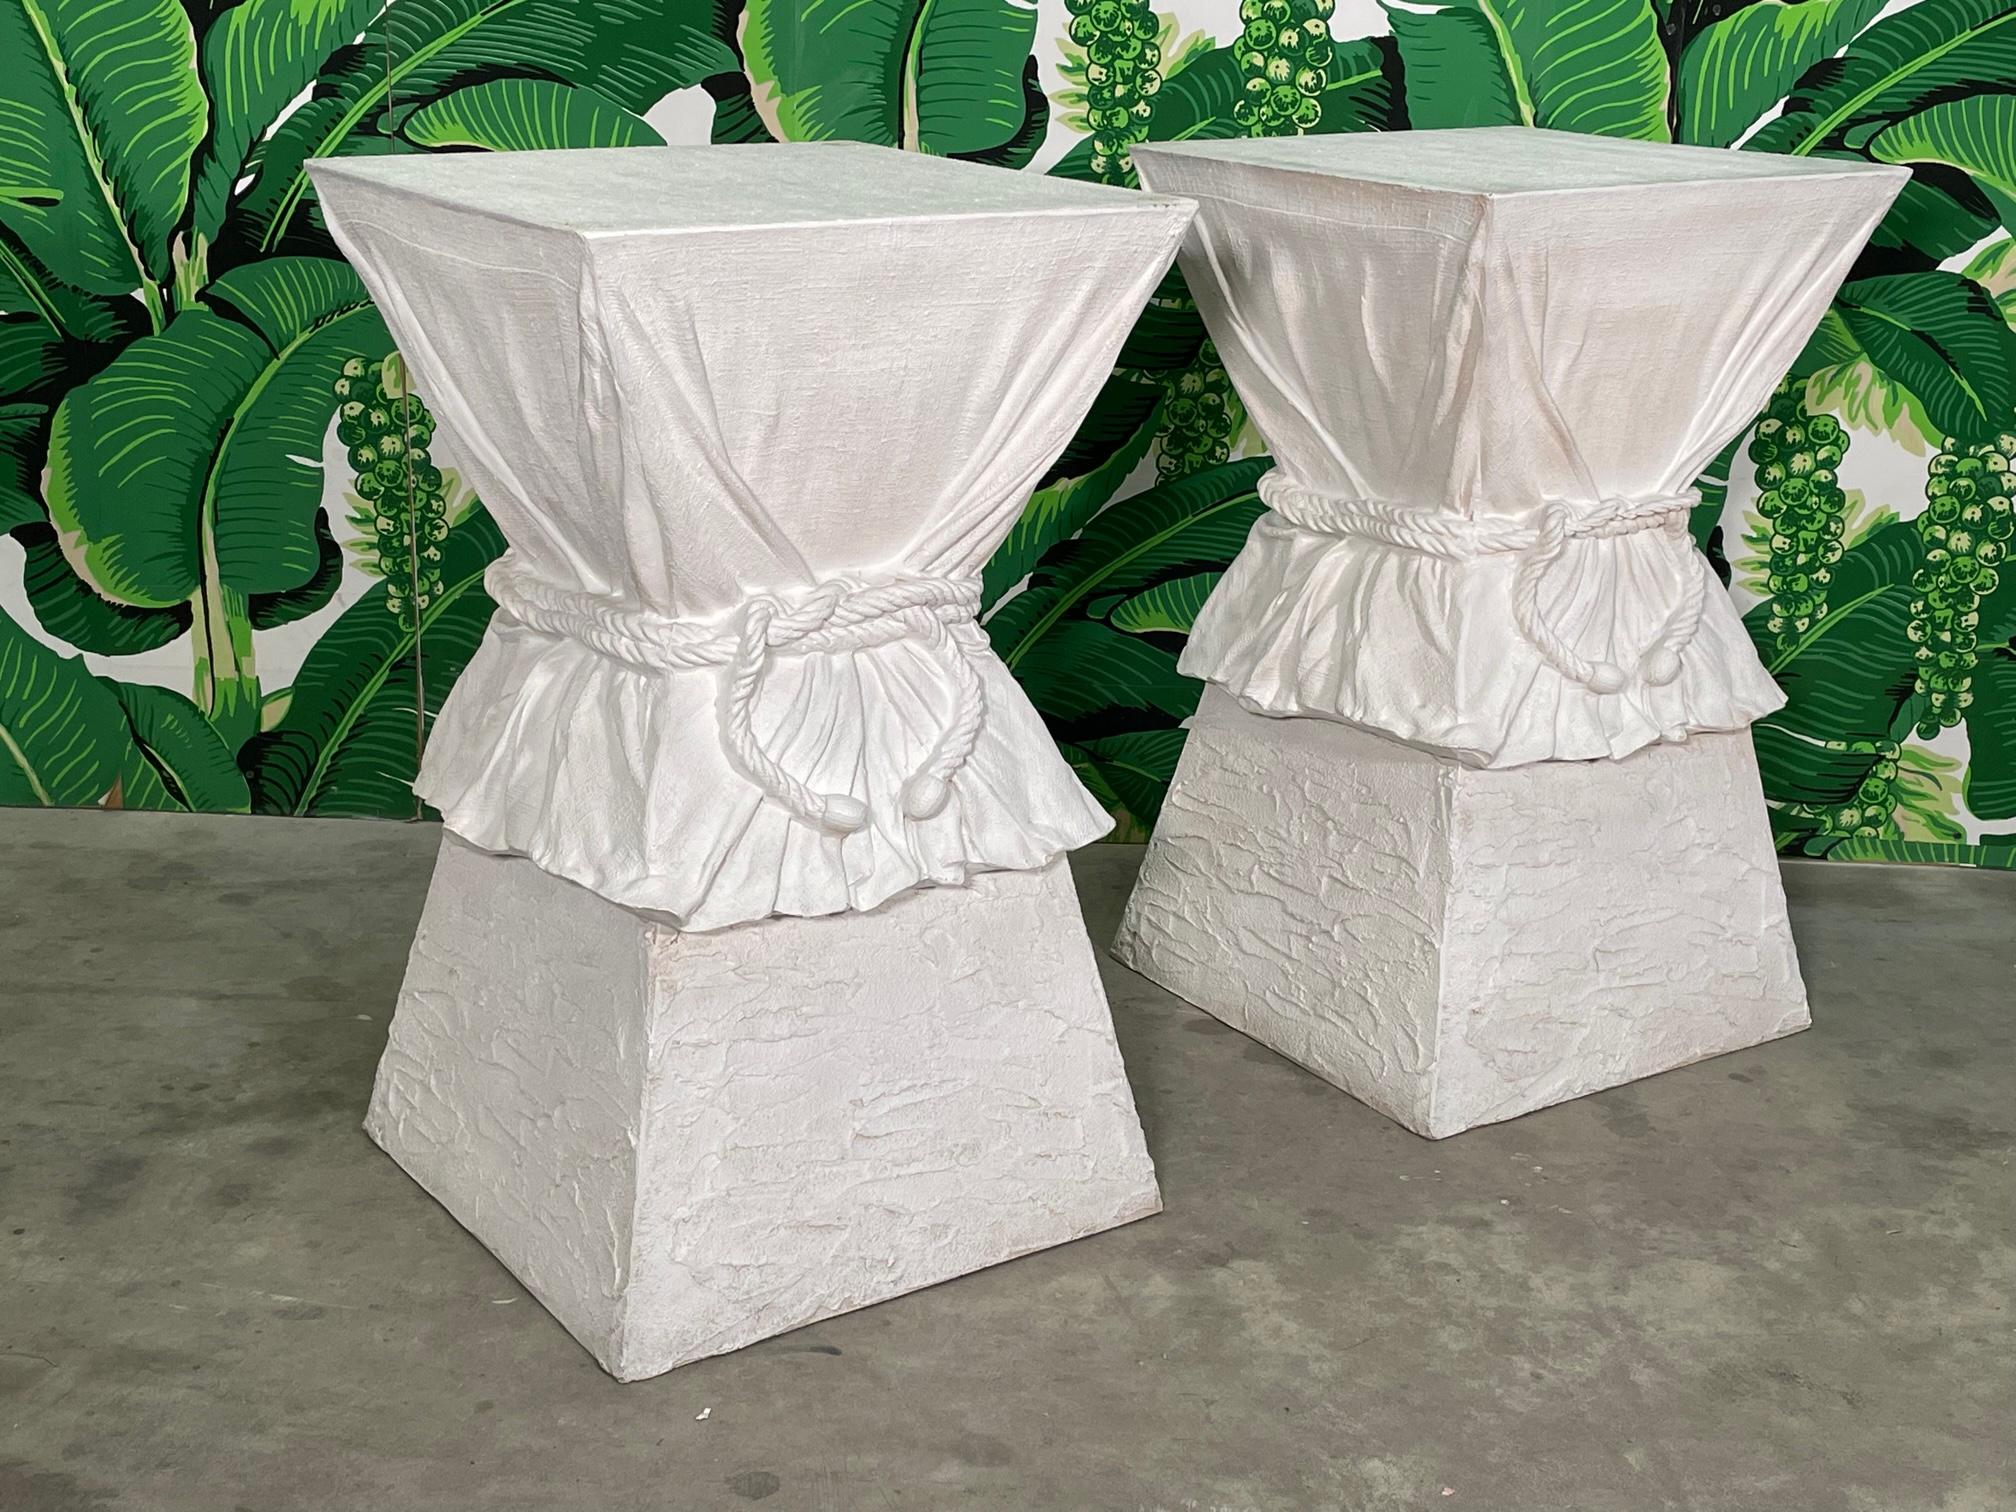 Pair of white dining table pedestals feature a sculptural hourglass shape with faux drapery and rope in the style of John Dickinson or Alberto Pinto. Terracotta structure finished in white gesso. Good condition with imperfections consistent with age